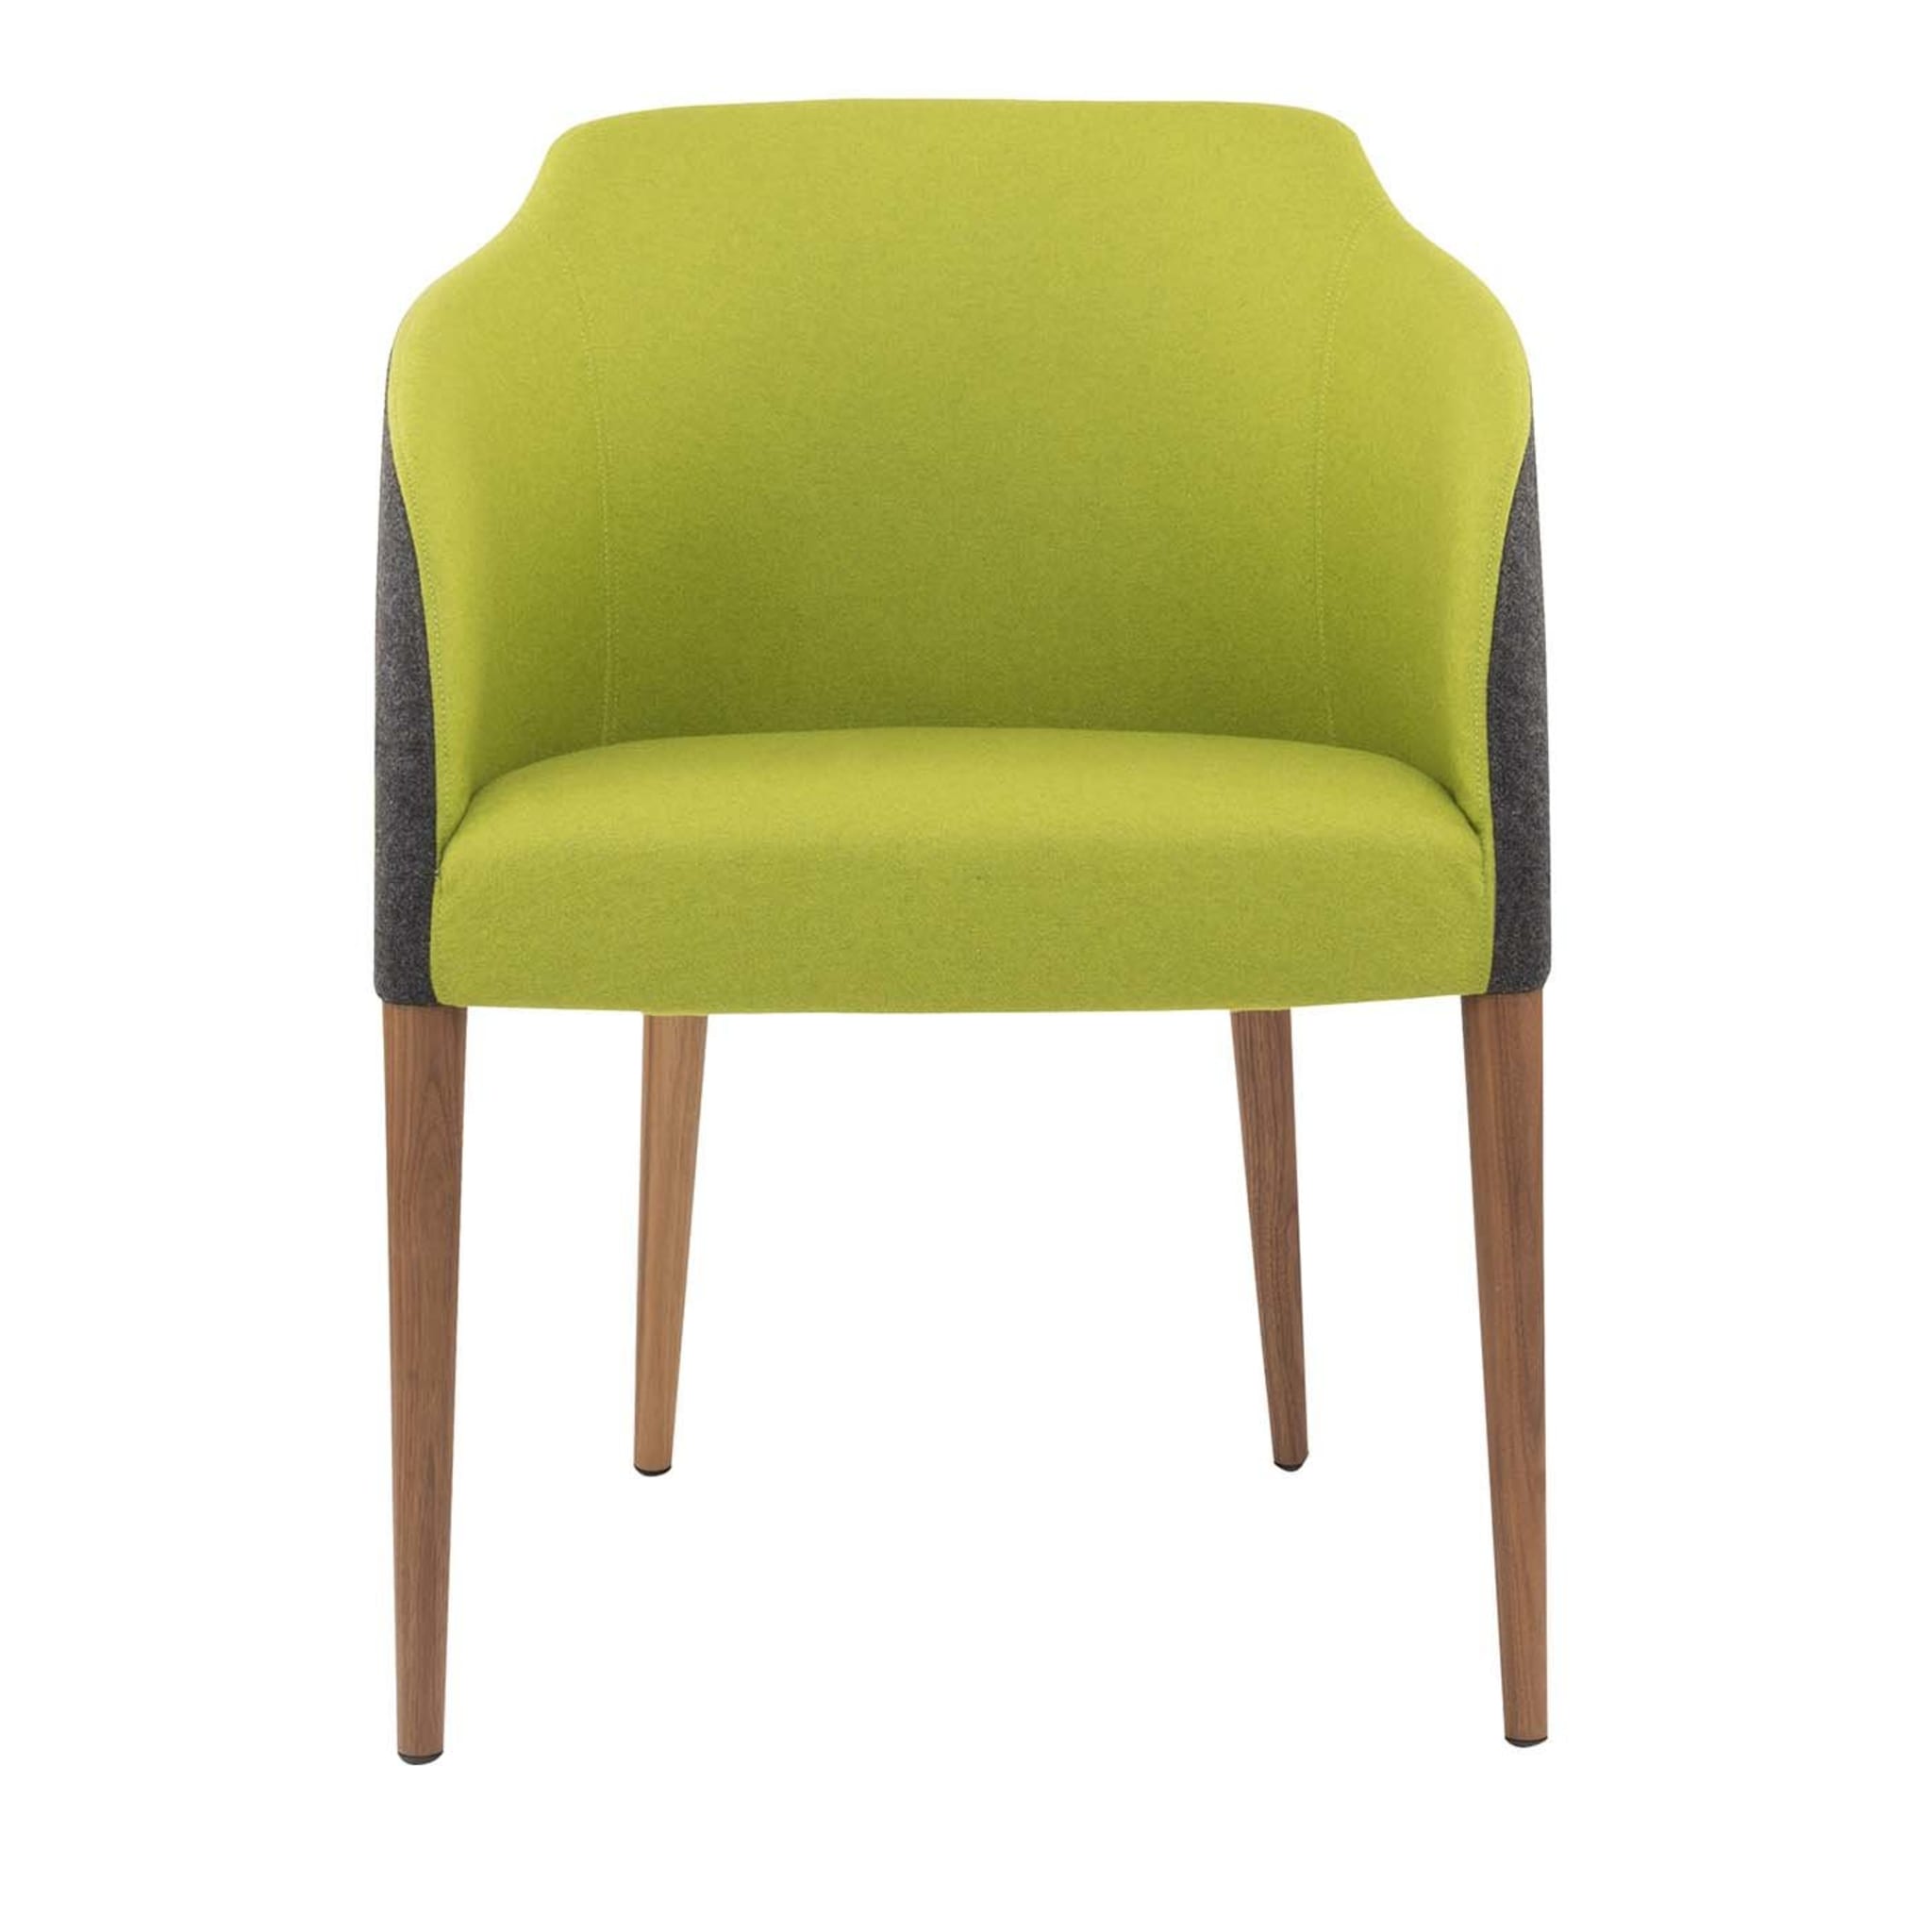 Stella Chair in Apple-Green and Anthracite-Gray Fabric - Main view